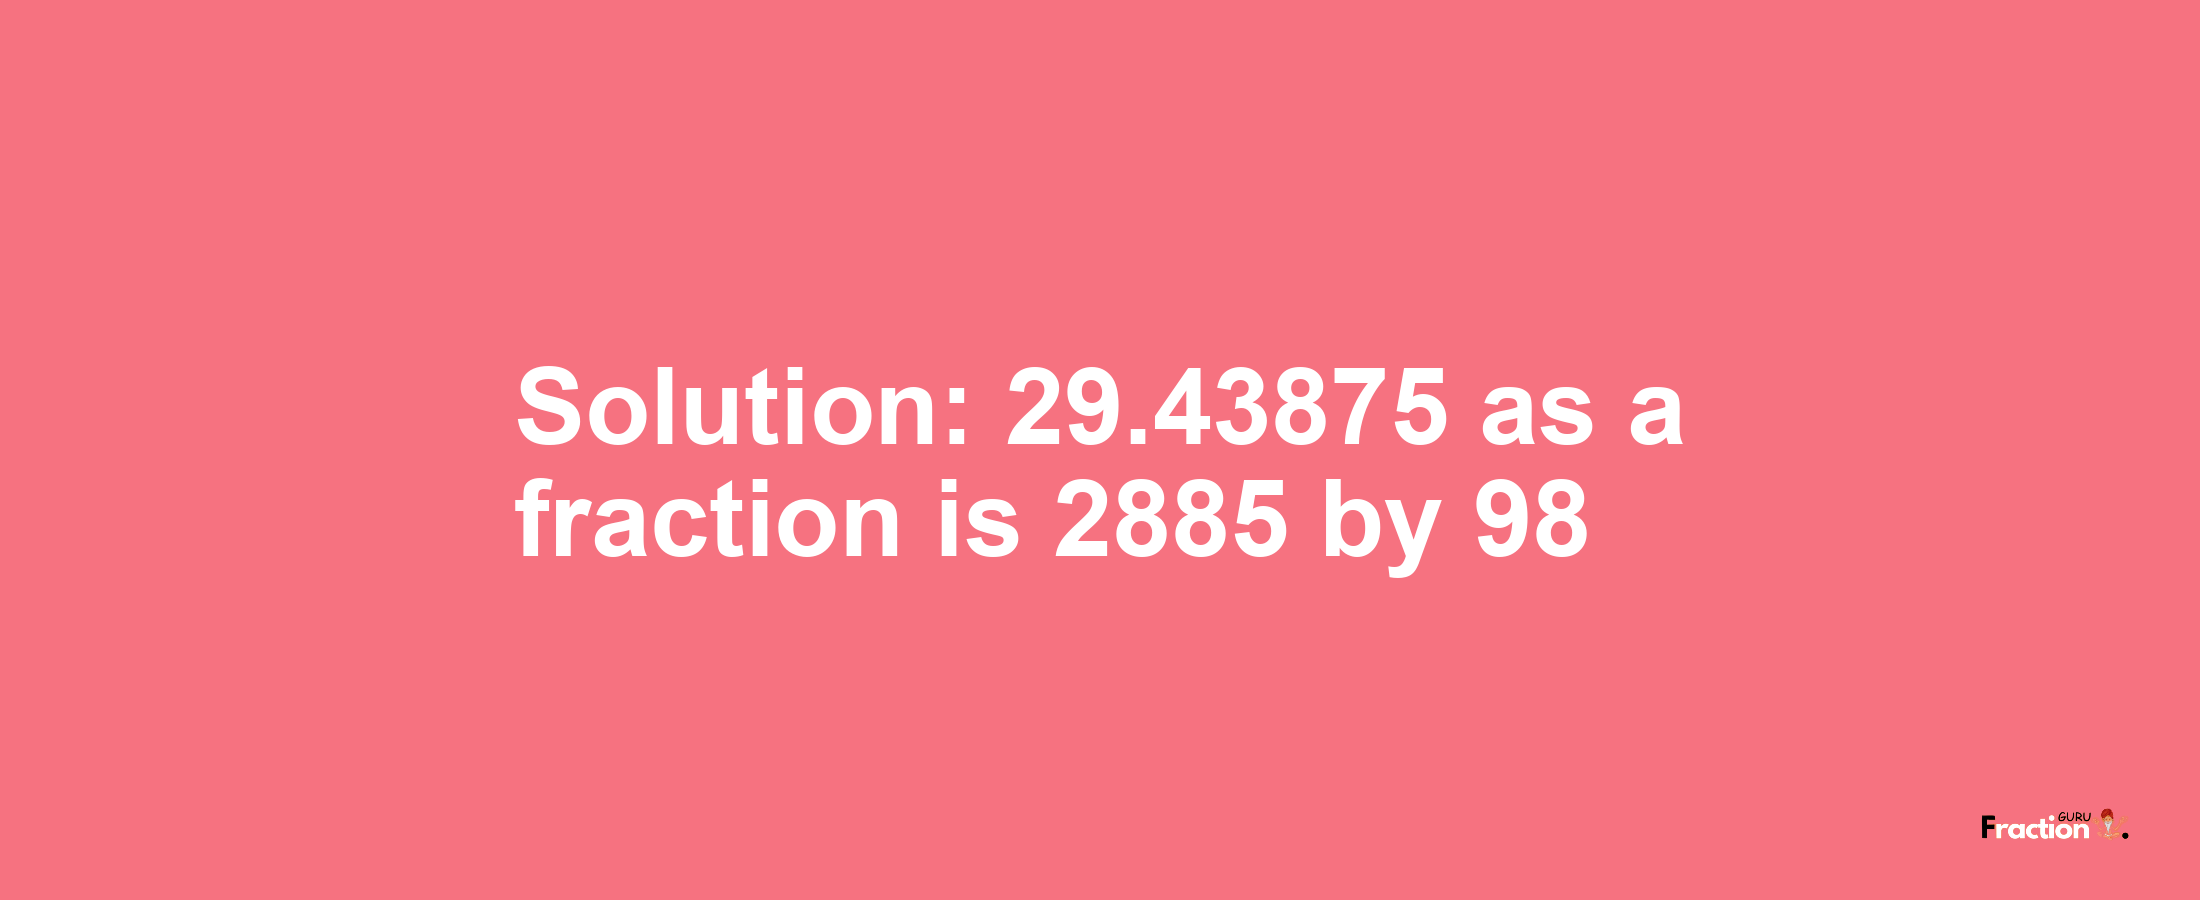 Solution:29.43875 as a fraction is 2885/98